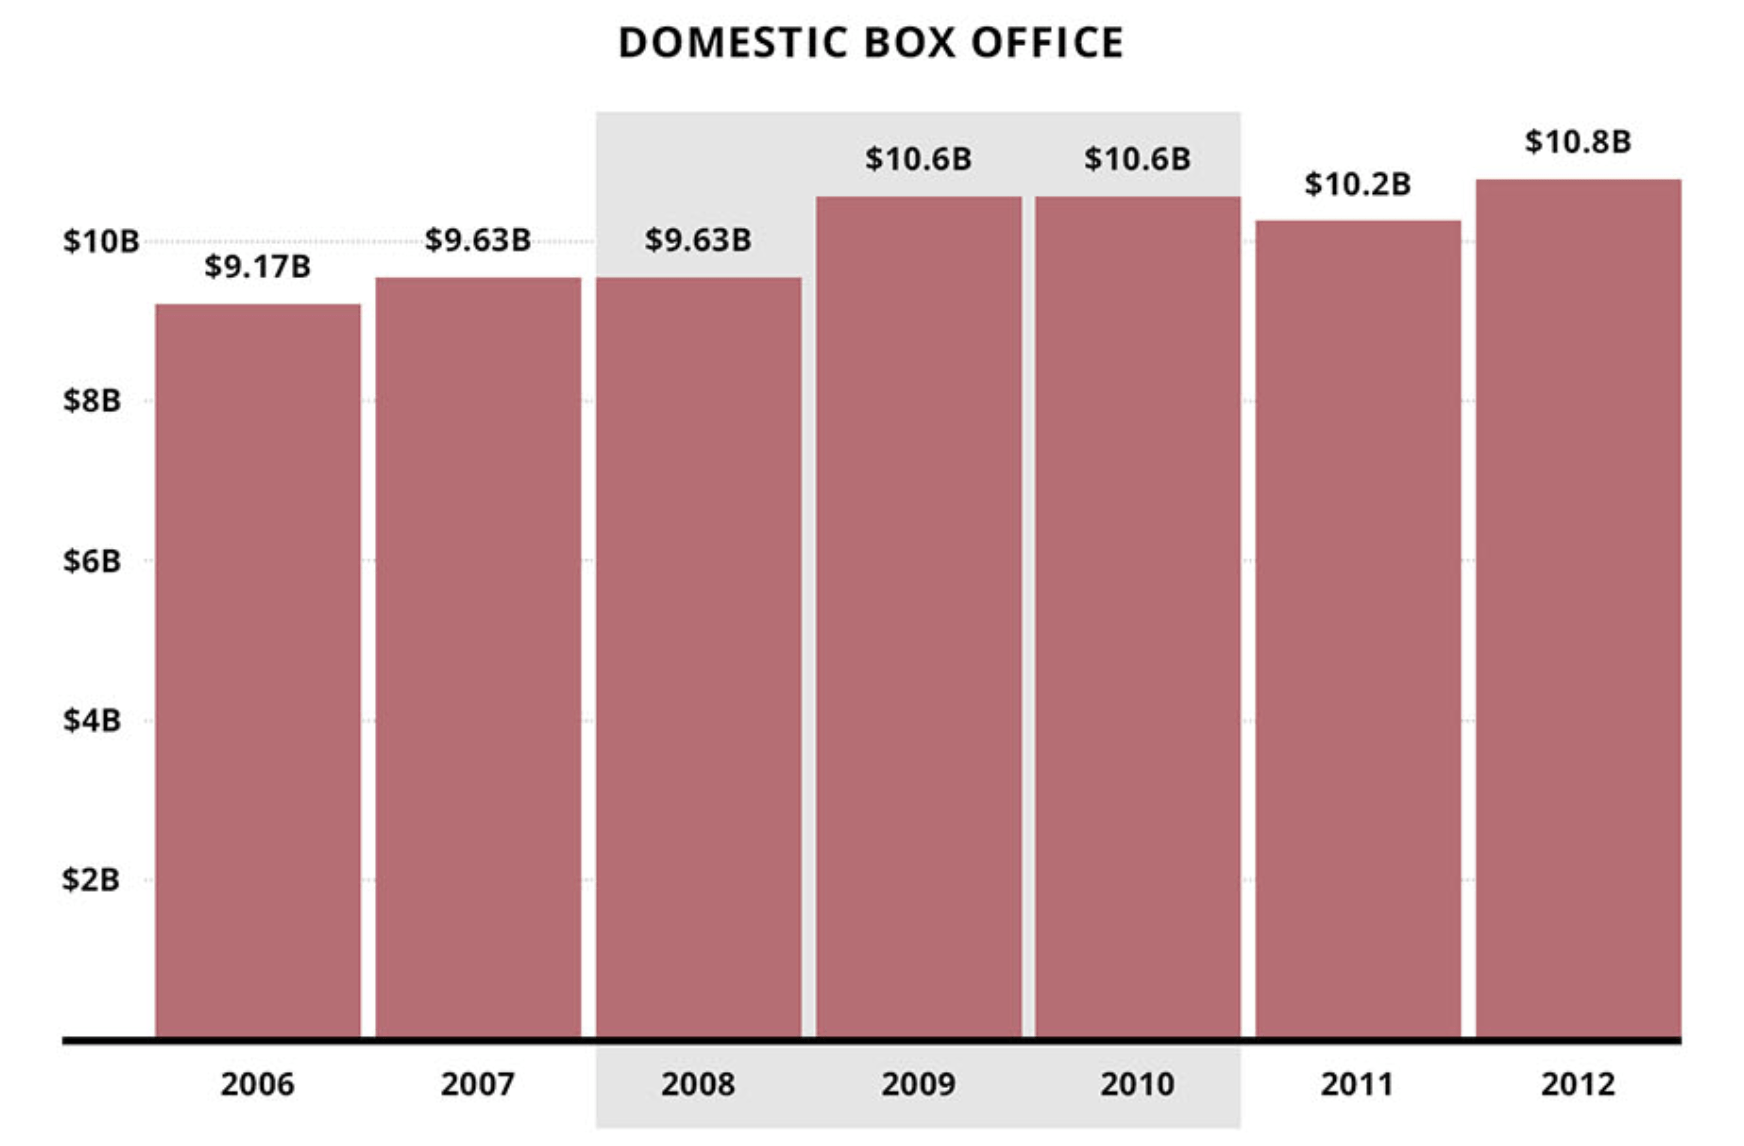 US Domestic Box Office 2006 to 2012